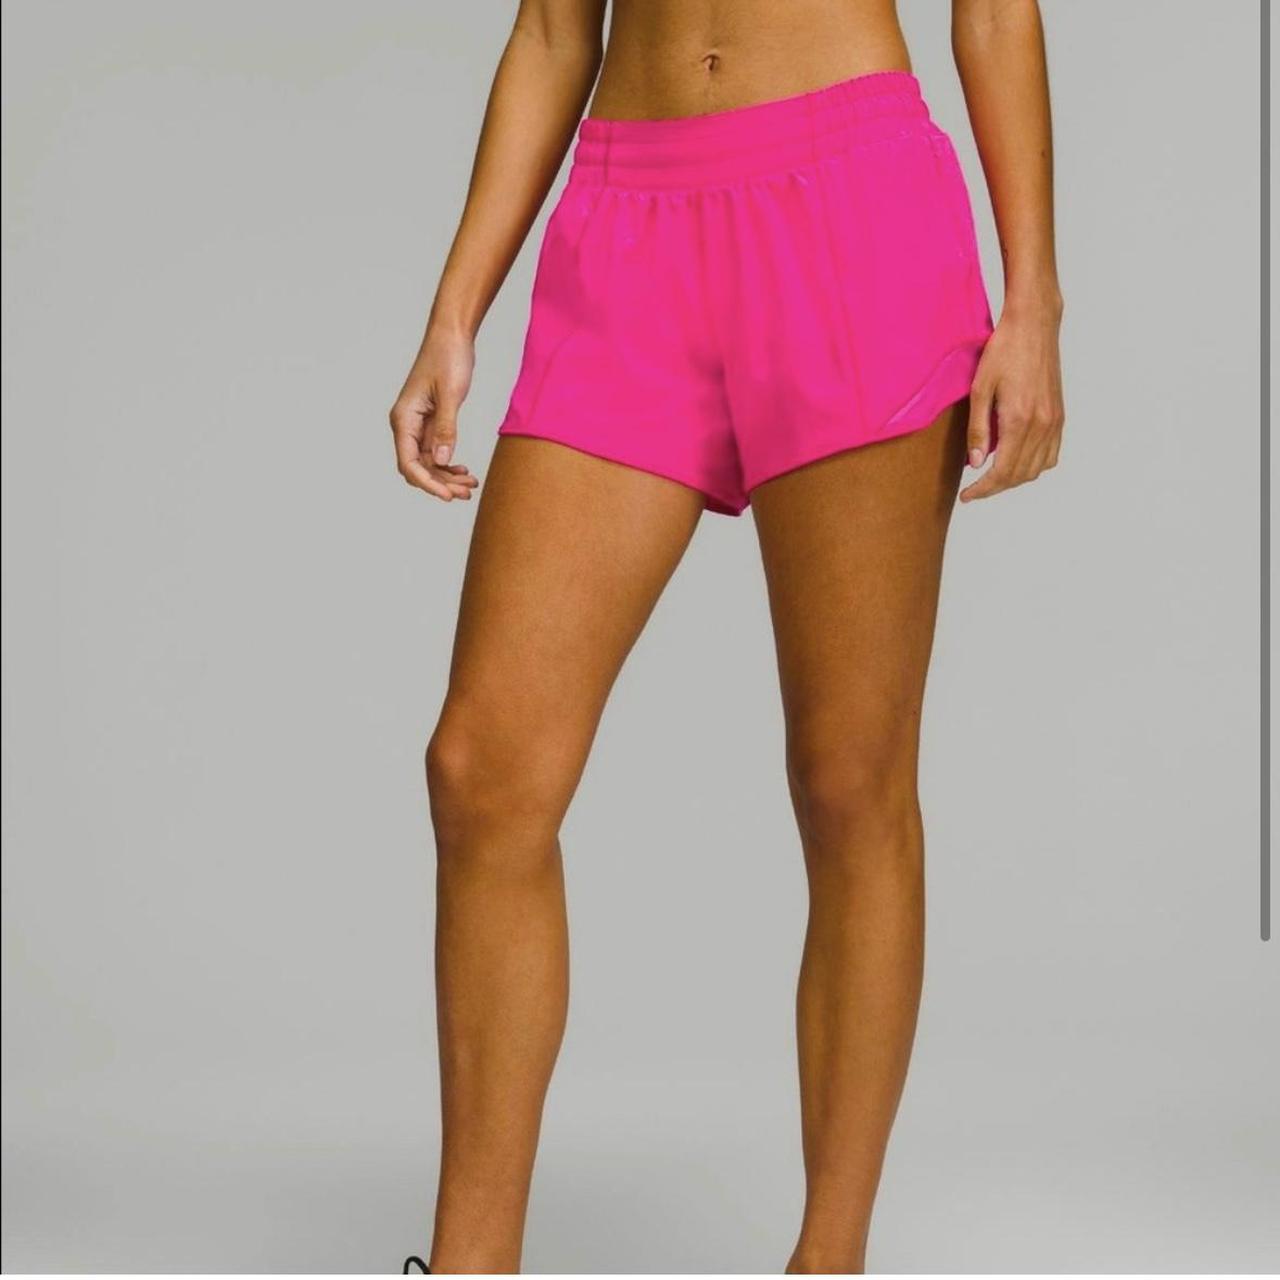 lululemon Hotty Hot Shorts Inseam 4” Low Rise Sonic Pink Size 8 NWT!